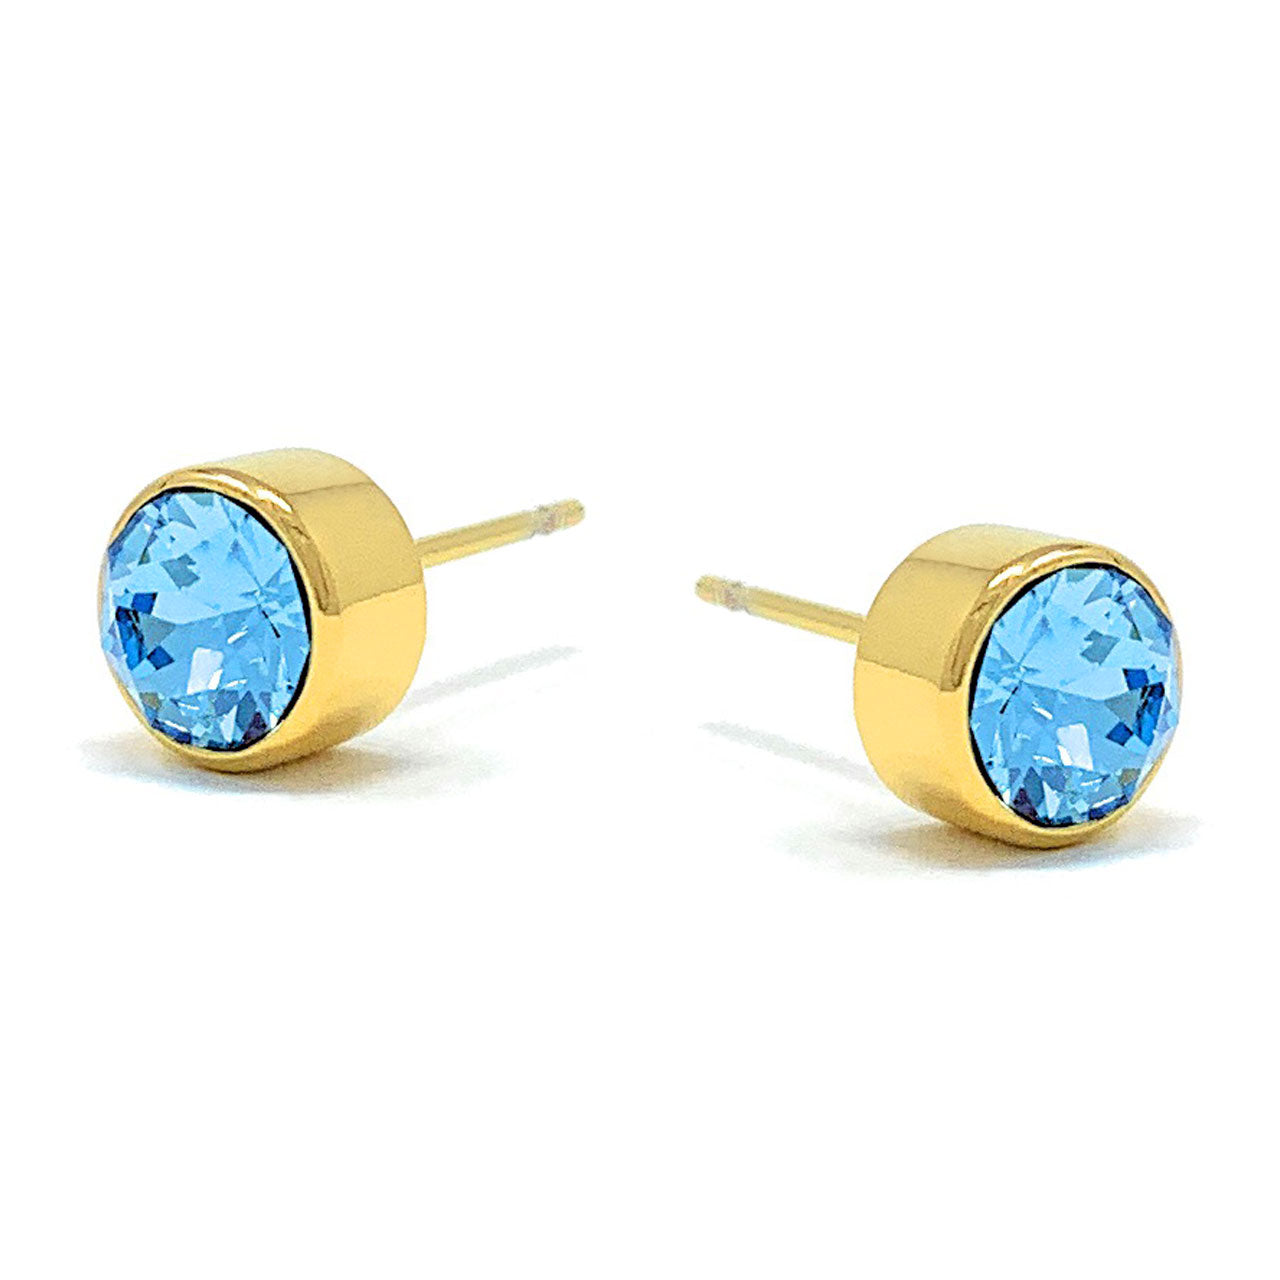 Harley Small Stud Earrings with Blue Aquamarine Round Crystals from Swarovski Gold Plated - Ed Heart